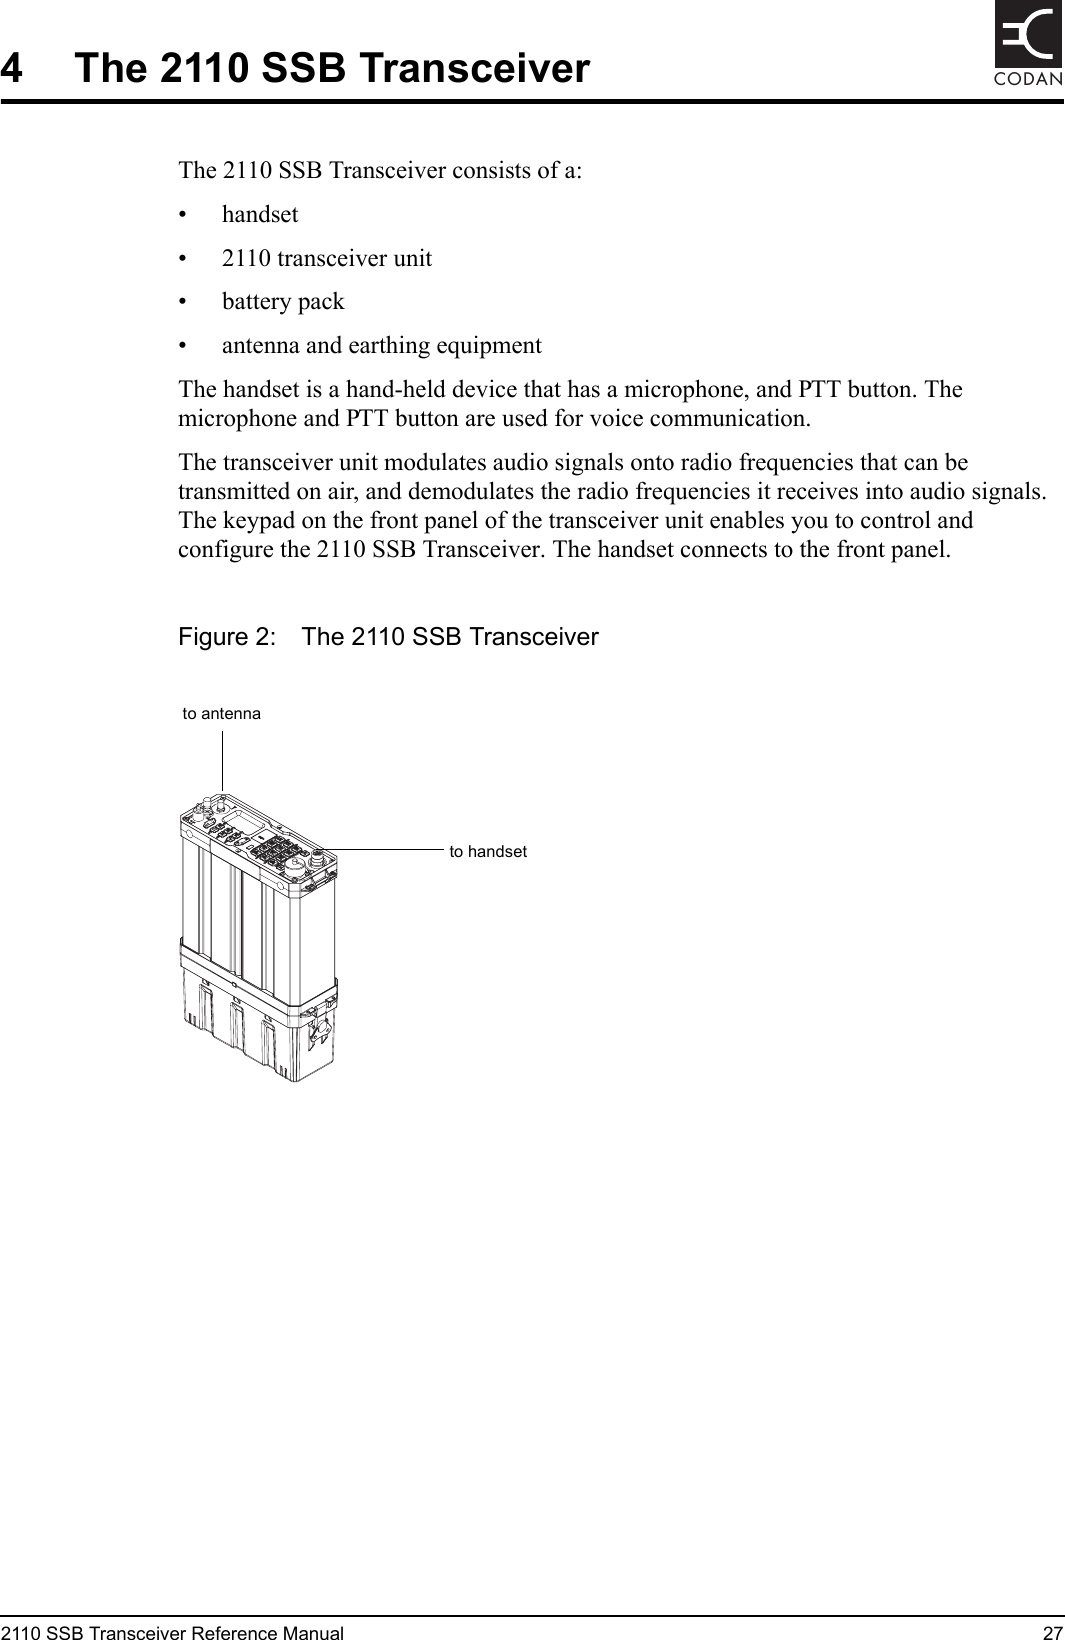 2110 SSB Transceiver Reference Manual 27CODAN4 The 2110 SSB TransceiverThe 2110 SSB Transceiver consists of a:• handset• 2110 transceiver unit• battery pack• antenna and earthing equipmentThe handset is a hand-held device that has a microphone, and PTT button. The microphone and PTT button are used for voice communication.The transceiver unit modulates audio signals onto radio frequencies that can be transmitted on air, and demodulates the radio frequencies it receives into audio signals. The keypad on the front panel of the transceiver unit enables you to control and configure the 2110 SSB Transceiver. The handset connects to the front panel.Figure 2: The 2110 SSB Transceiverto handsetto antenna